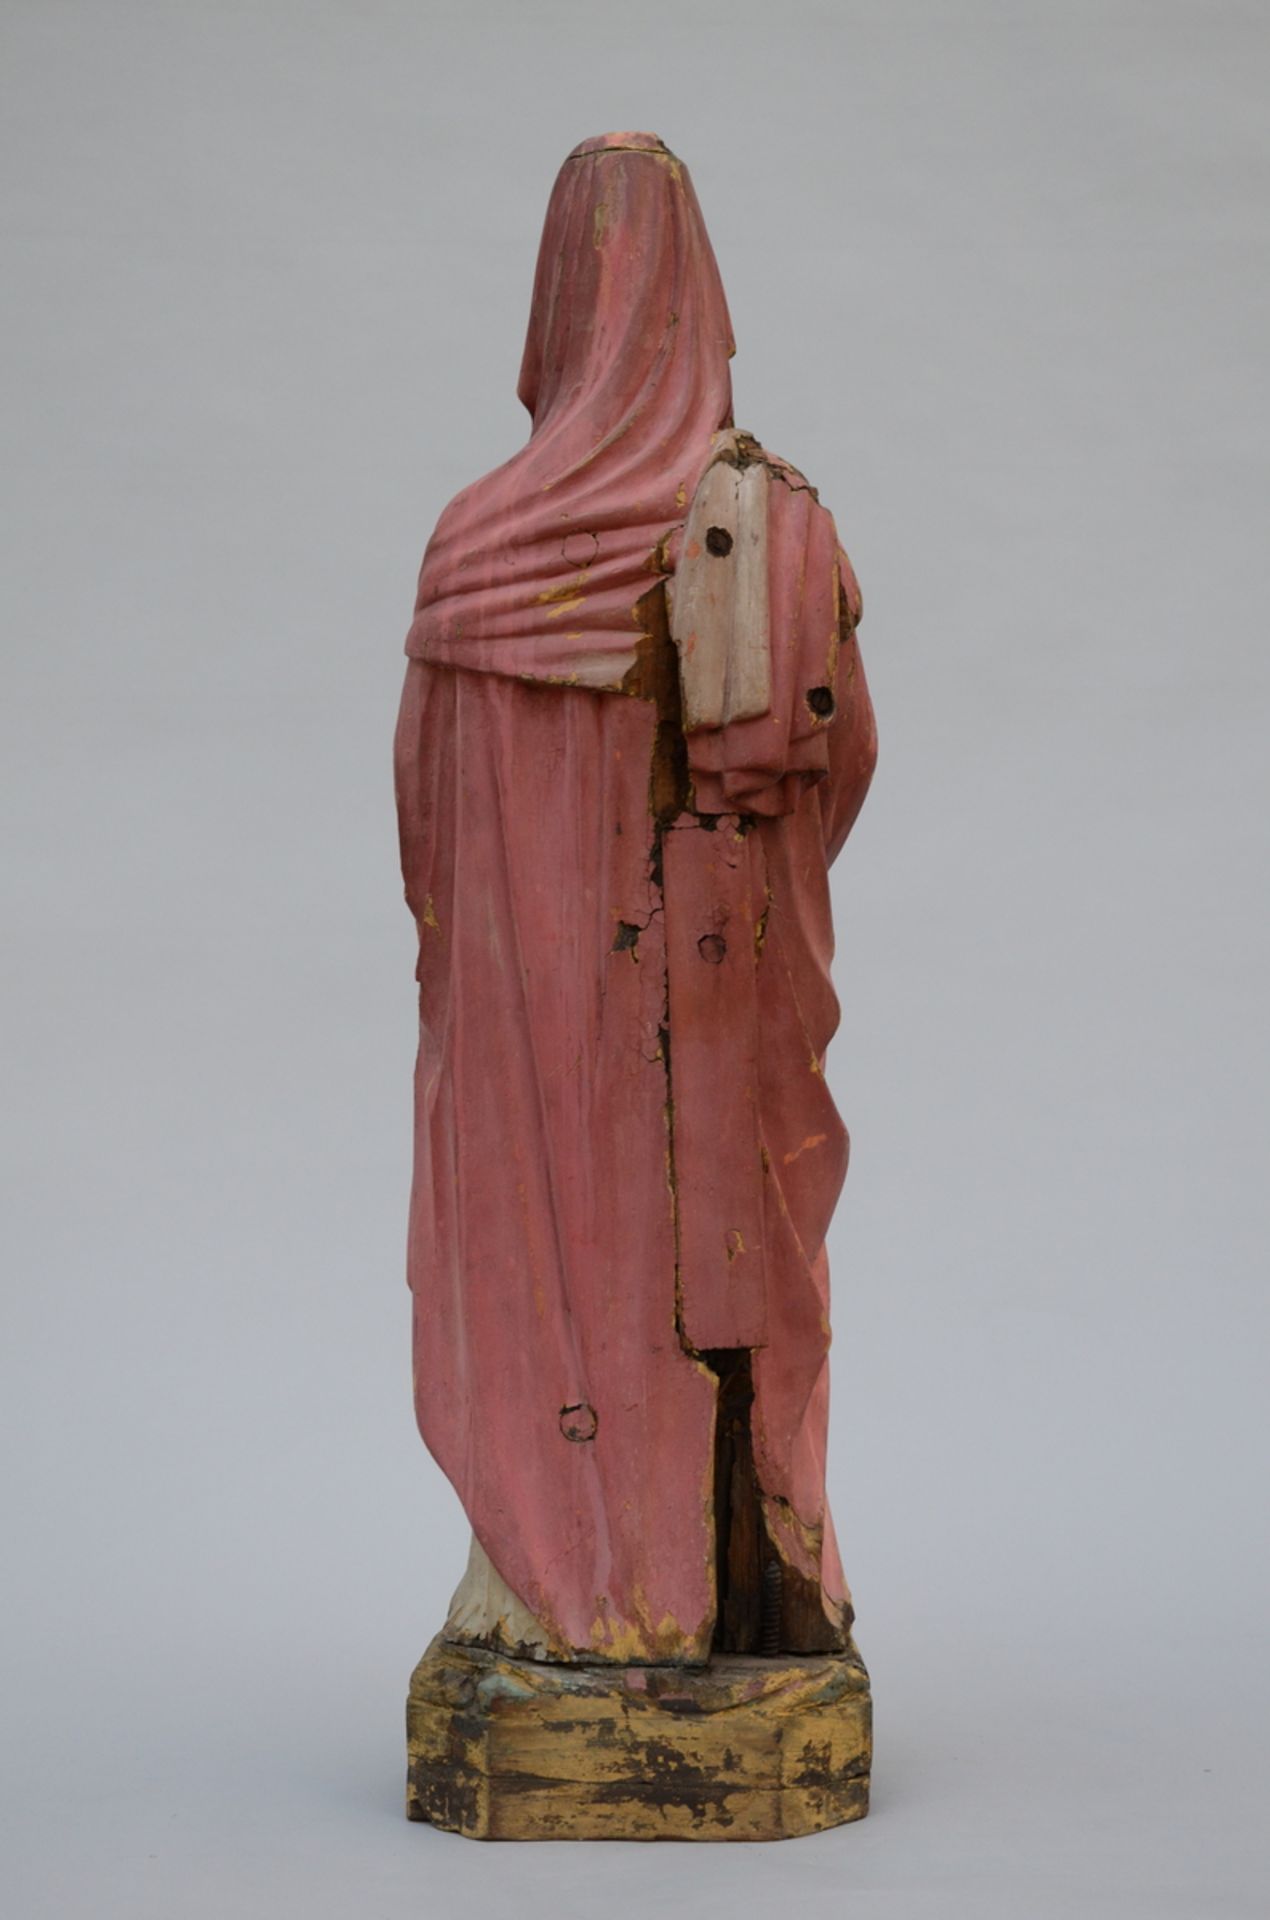 Polychrome statue in wood 'St. John from Britto', Goa (h87cm) (*) - Image 3 of 4